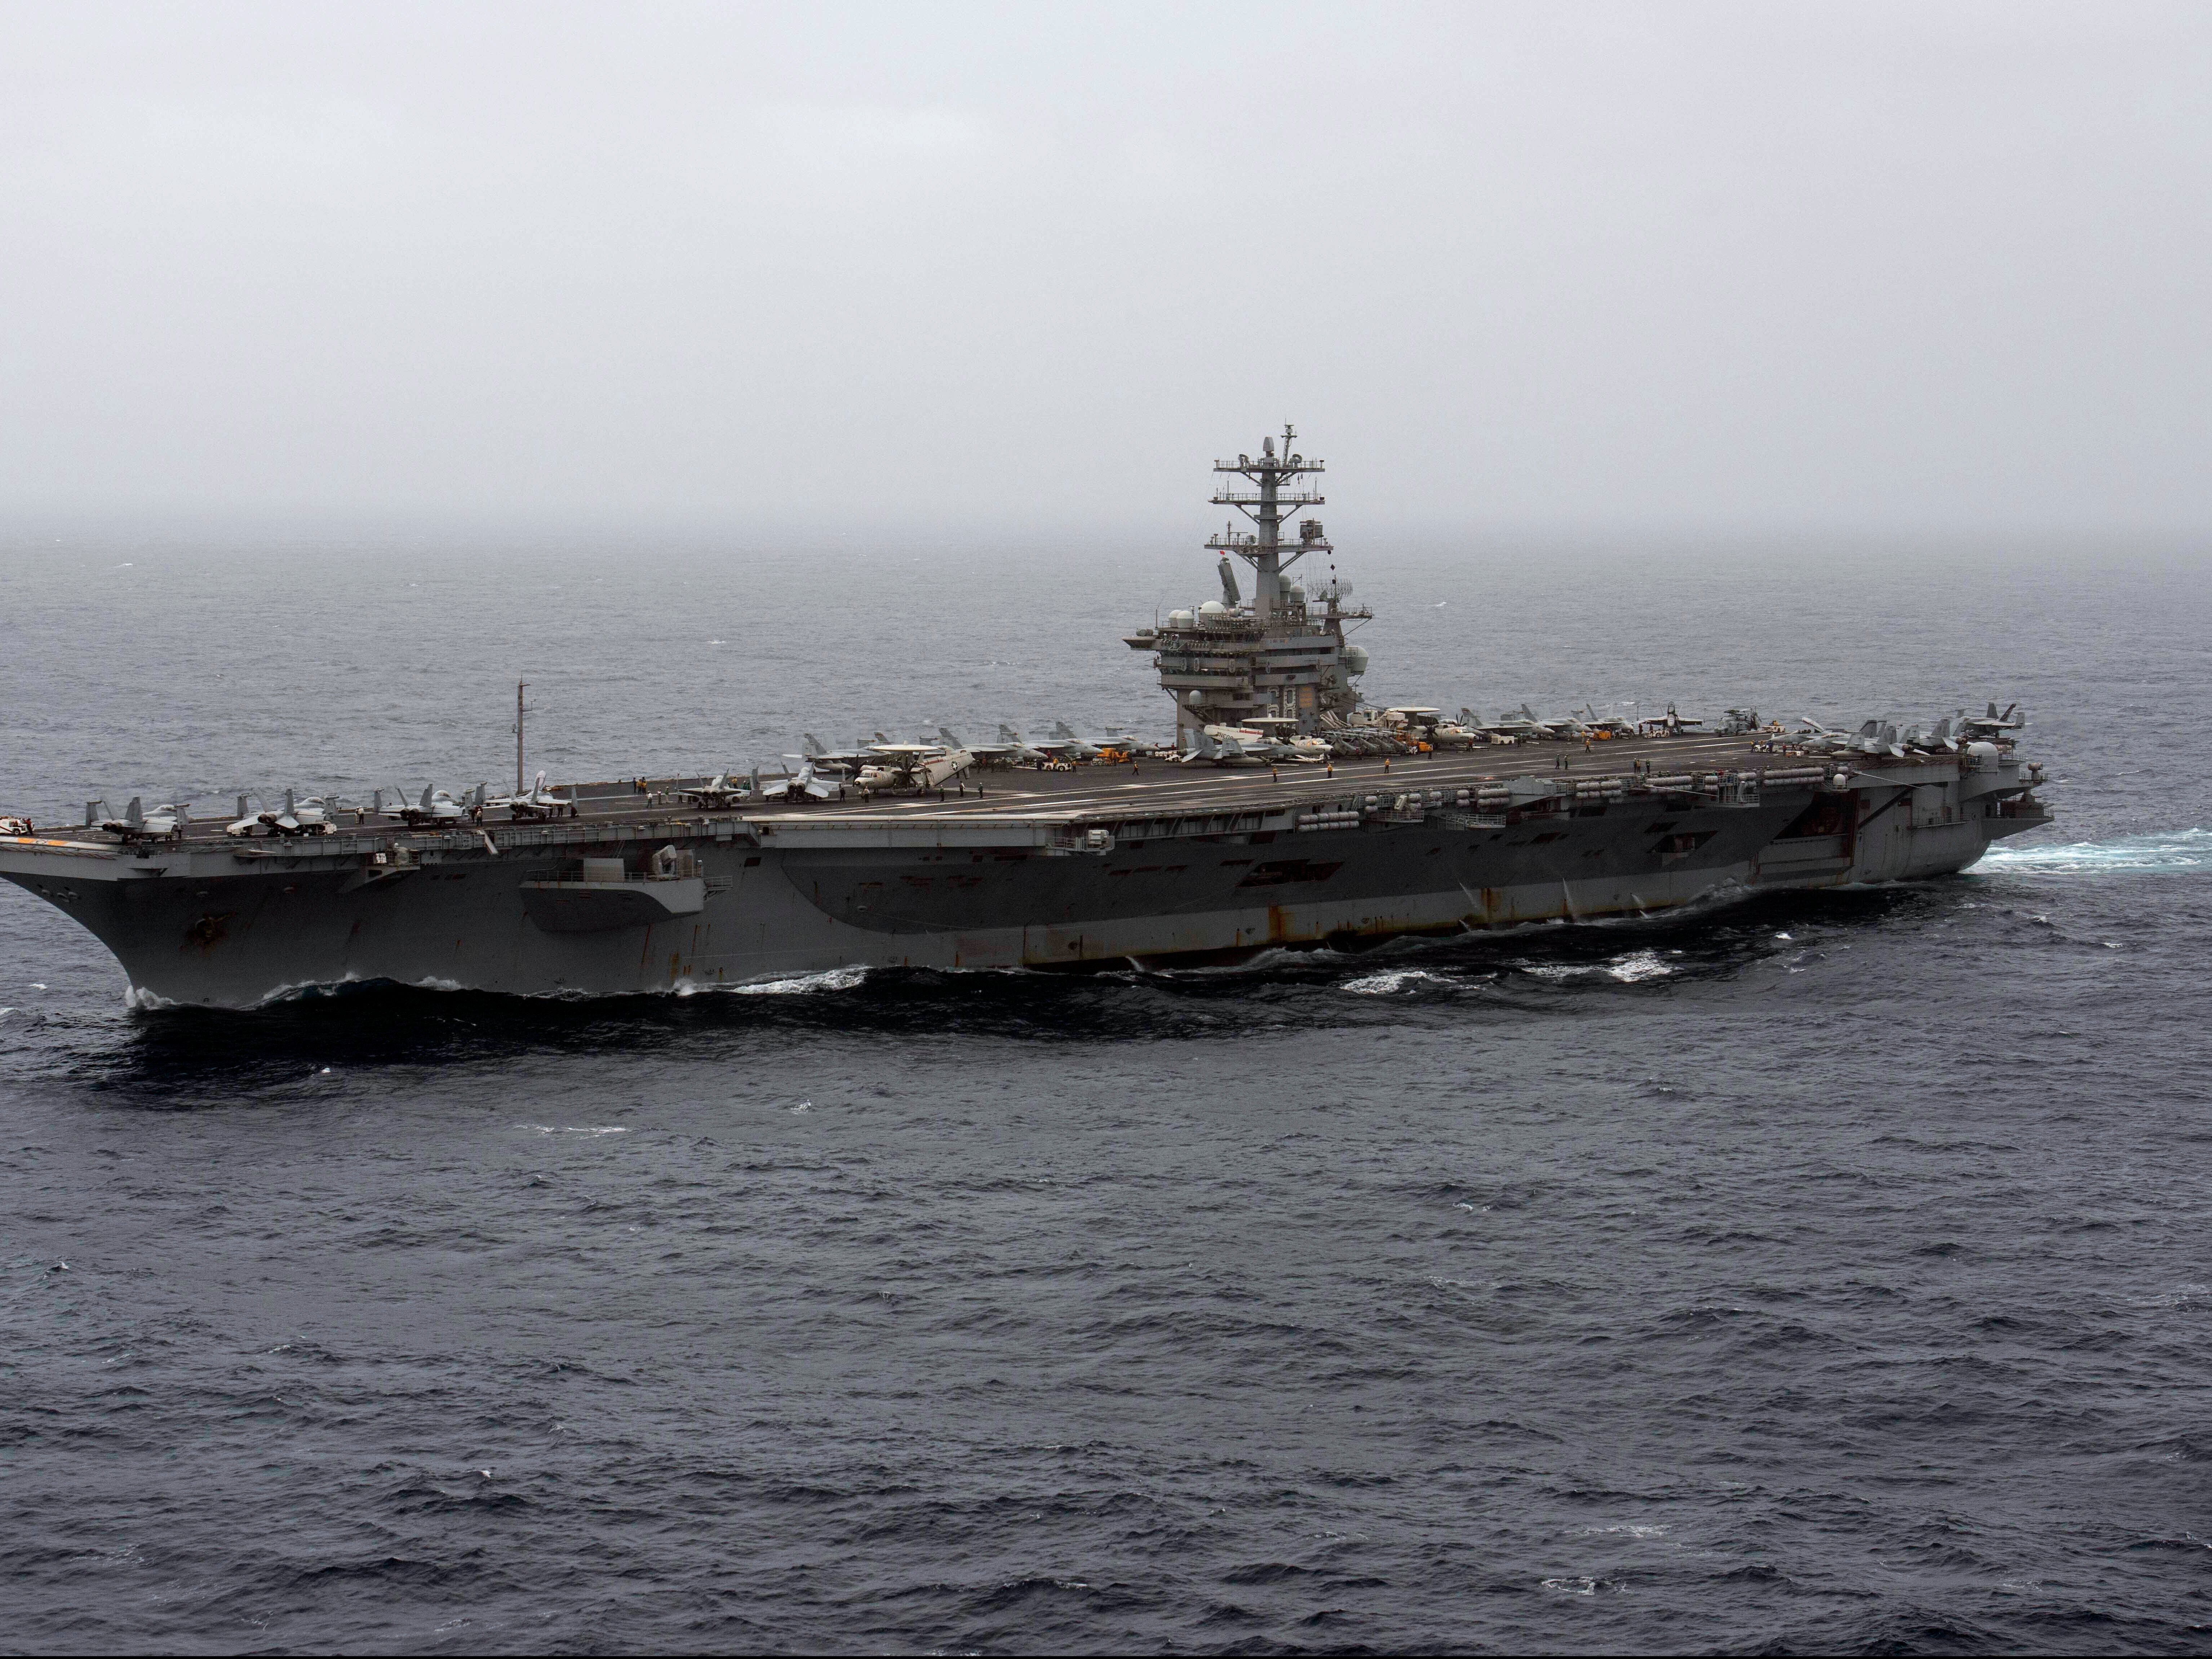 The Pentagon announced on 3 January 2021 that it would reverse its decision to return the USS Nimitz home to the US West Coast